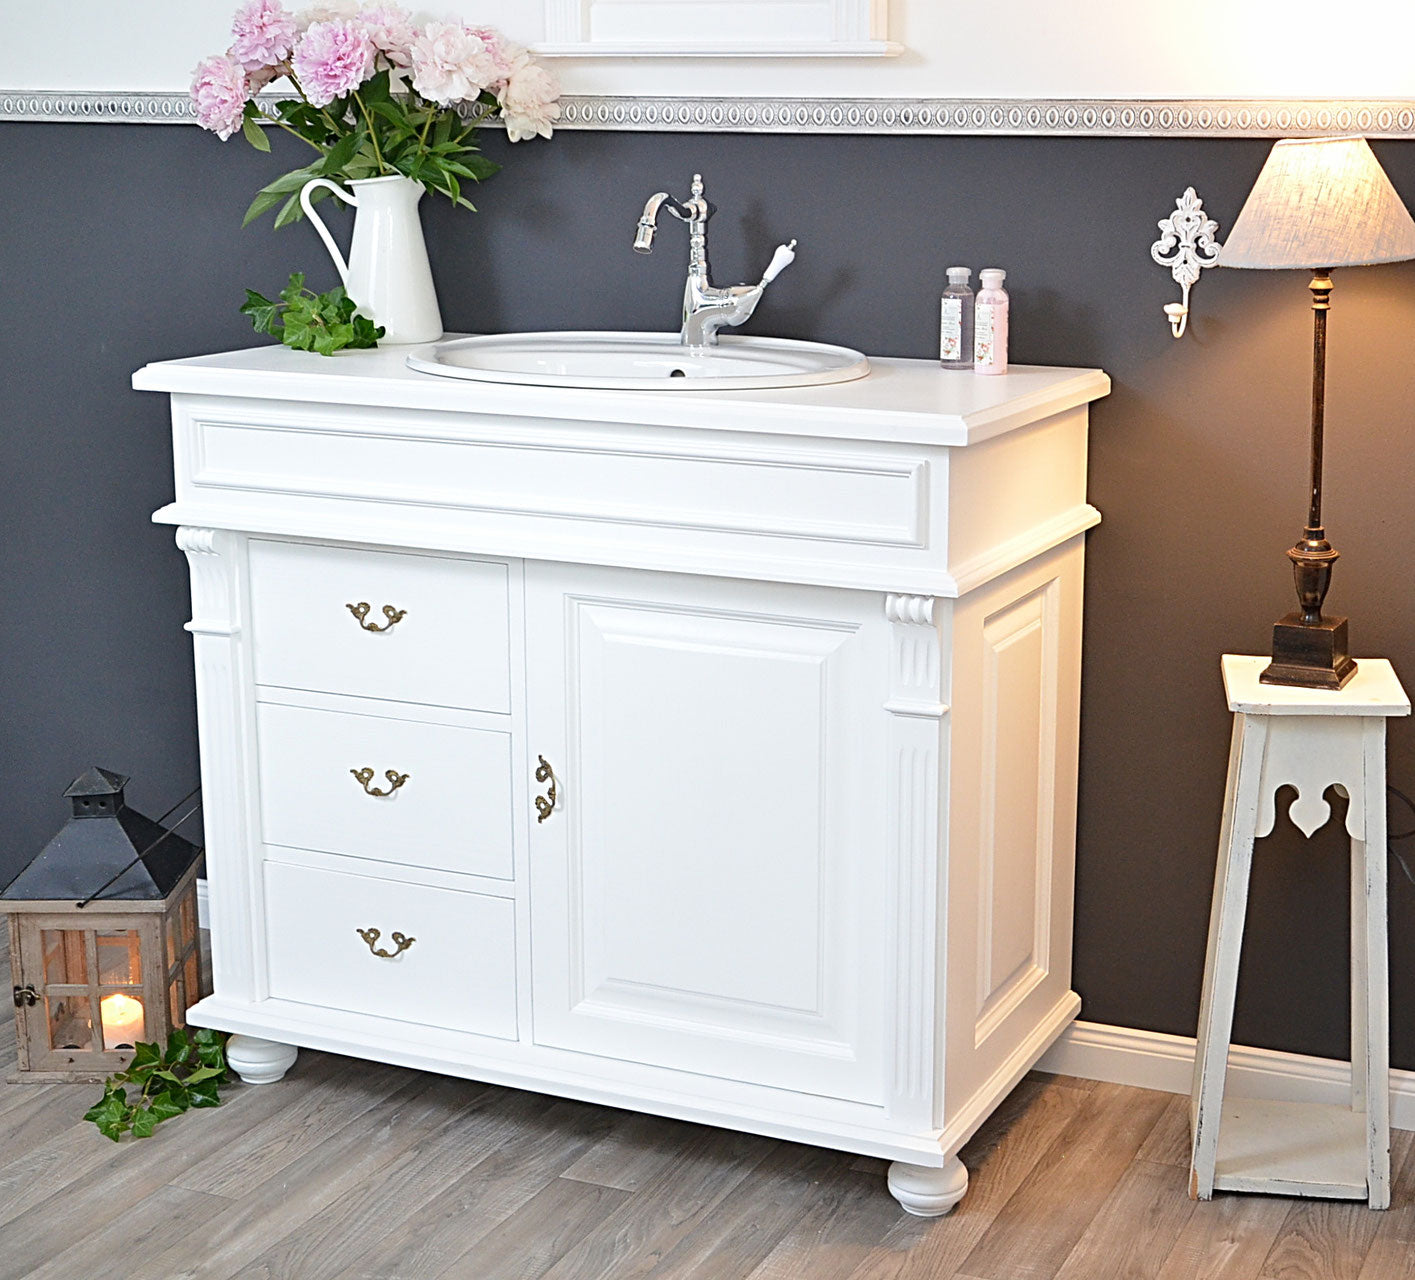 "Oldham" white country house washbasin with inlet basin